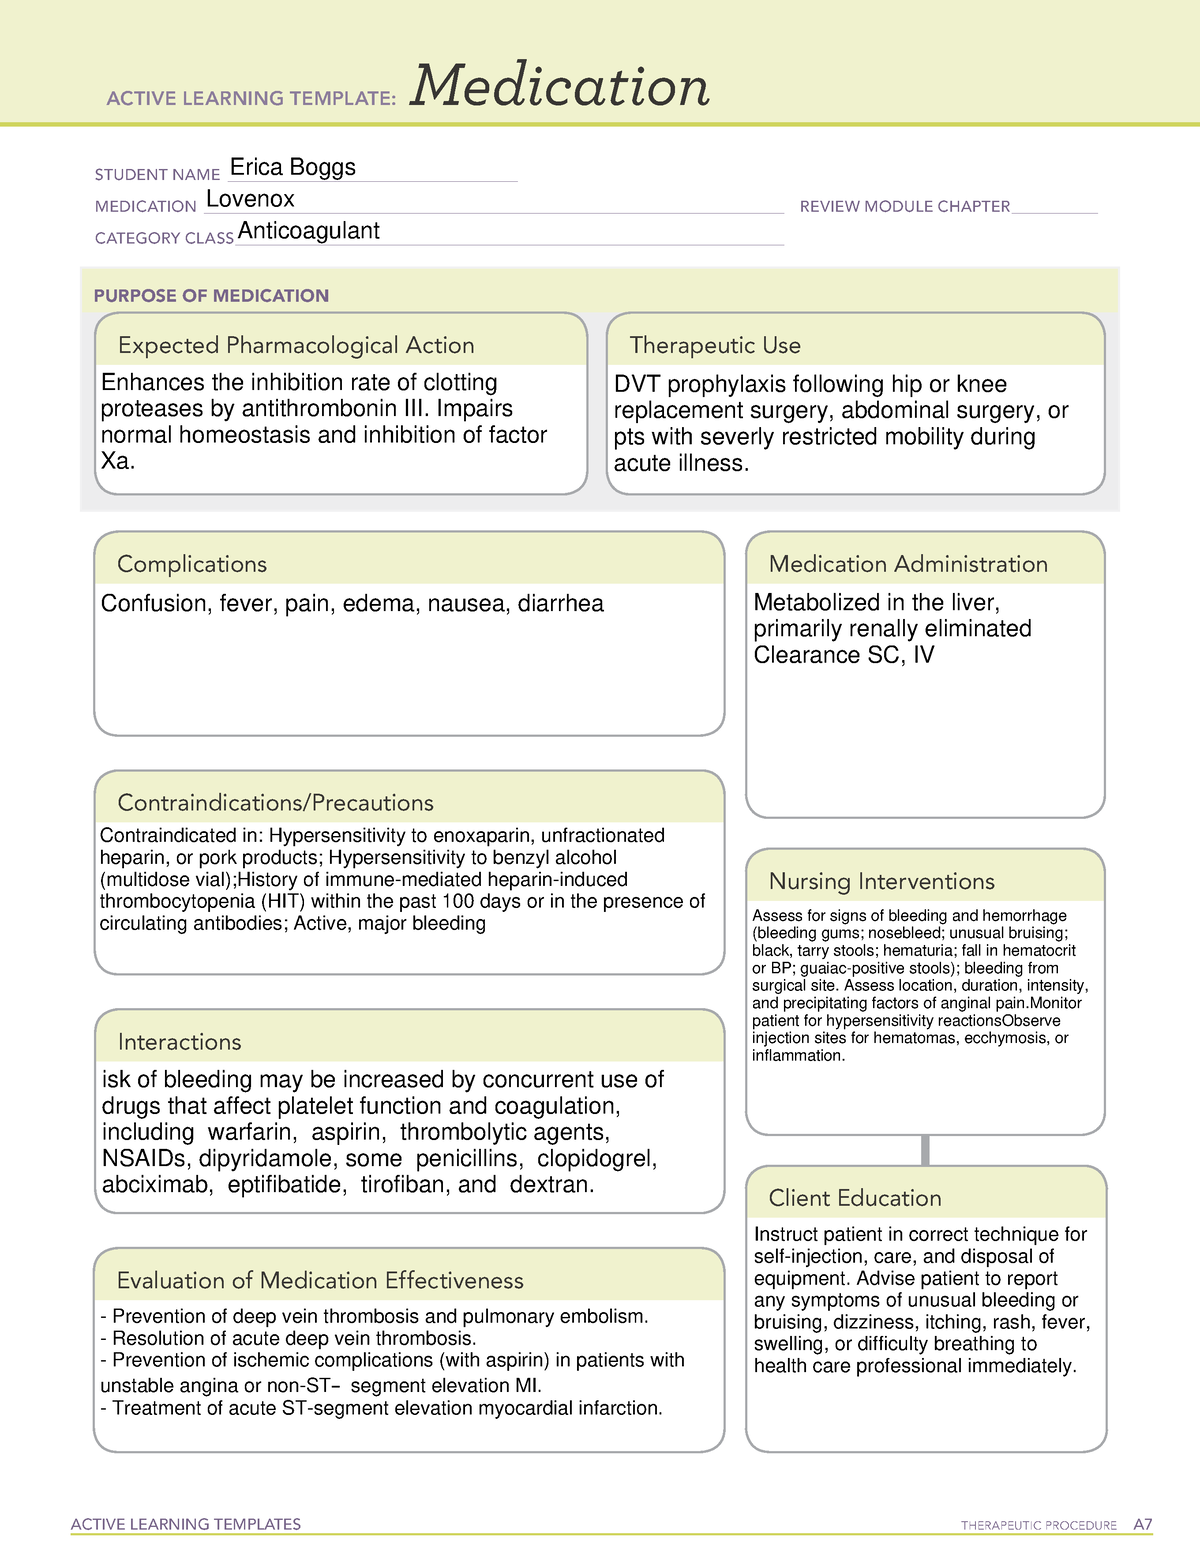 Lovenox Medication Sheet - ACTIVE LEARNING TEMPLATES THERAPEUTIC ...